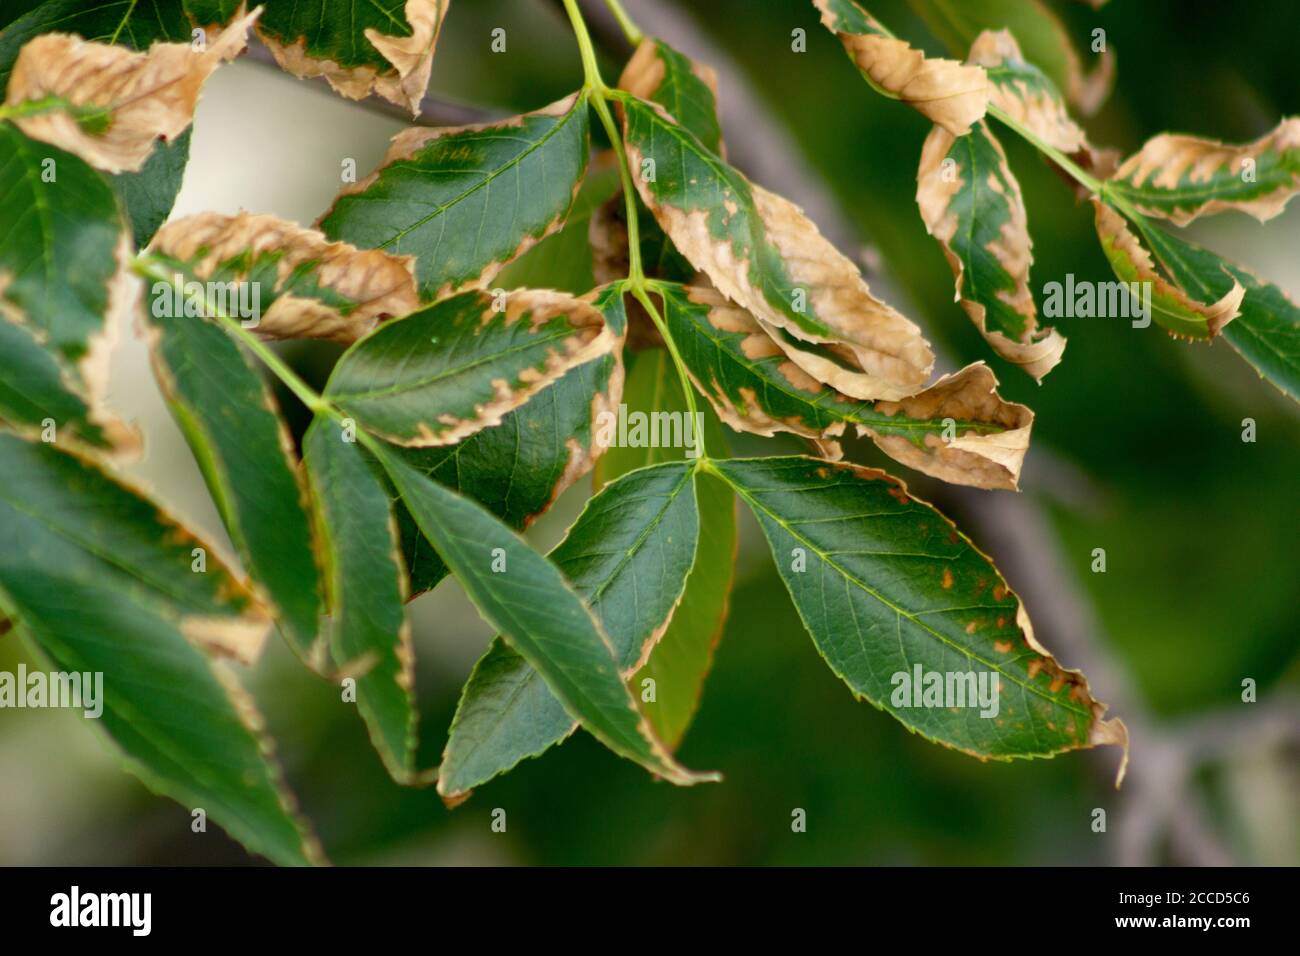 Leaves of a Green Ash tree, browning at the edges Stock Photo